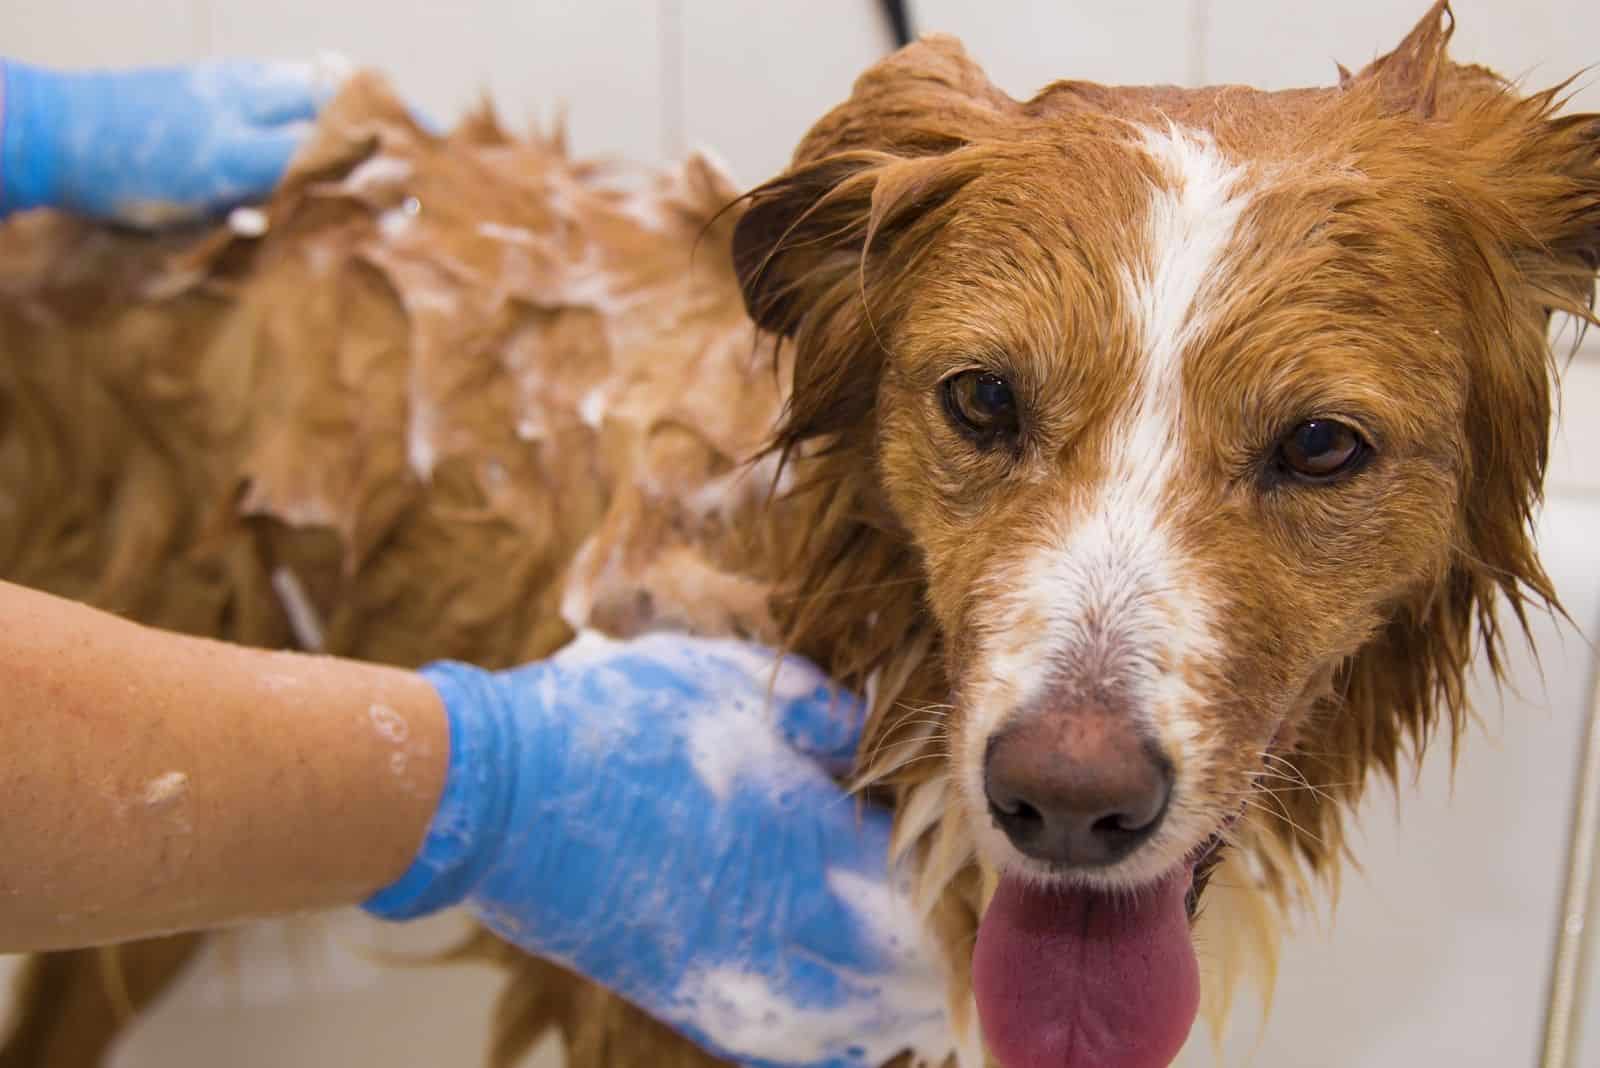 bathing border collie in the tub by a person